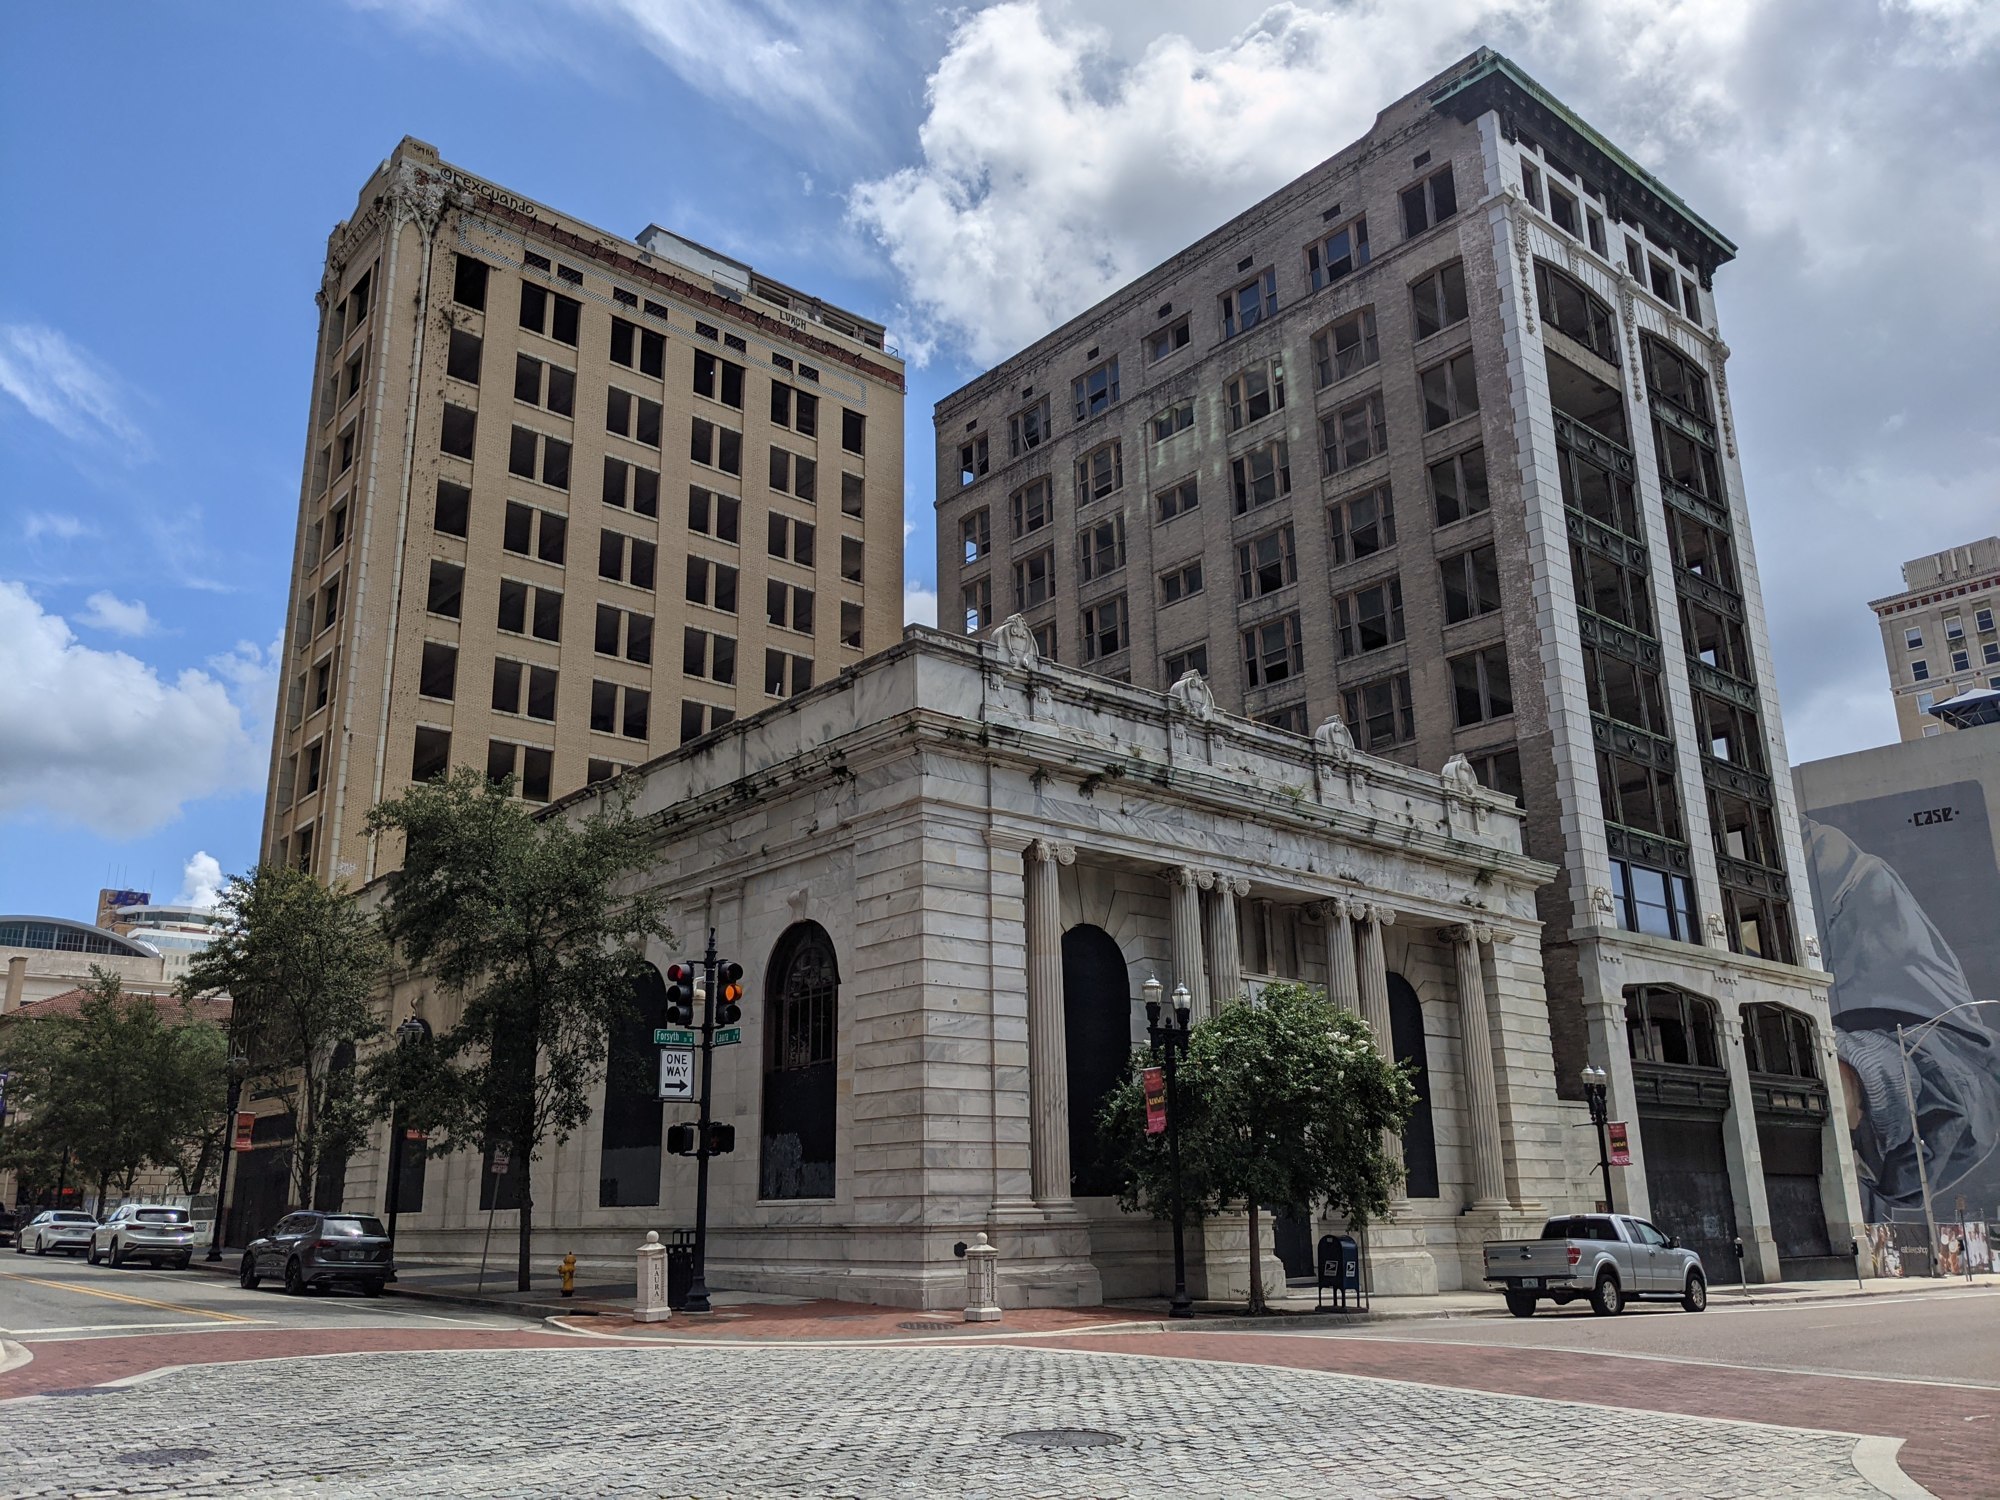 The Trio buildings, built between 1902 and 1912, are historic and contributing structures to the Downtown Jacksonville National Register District.